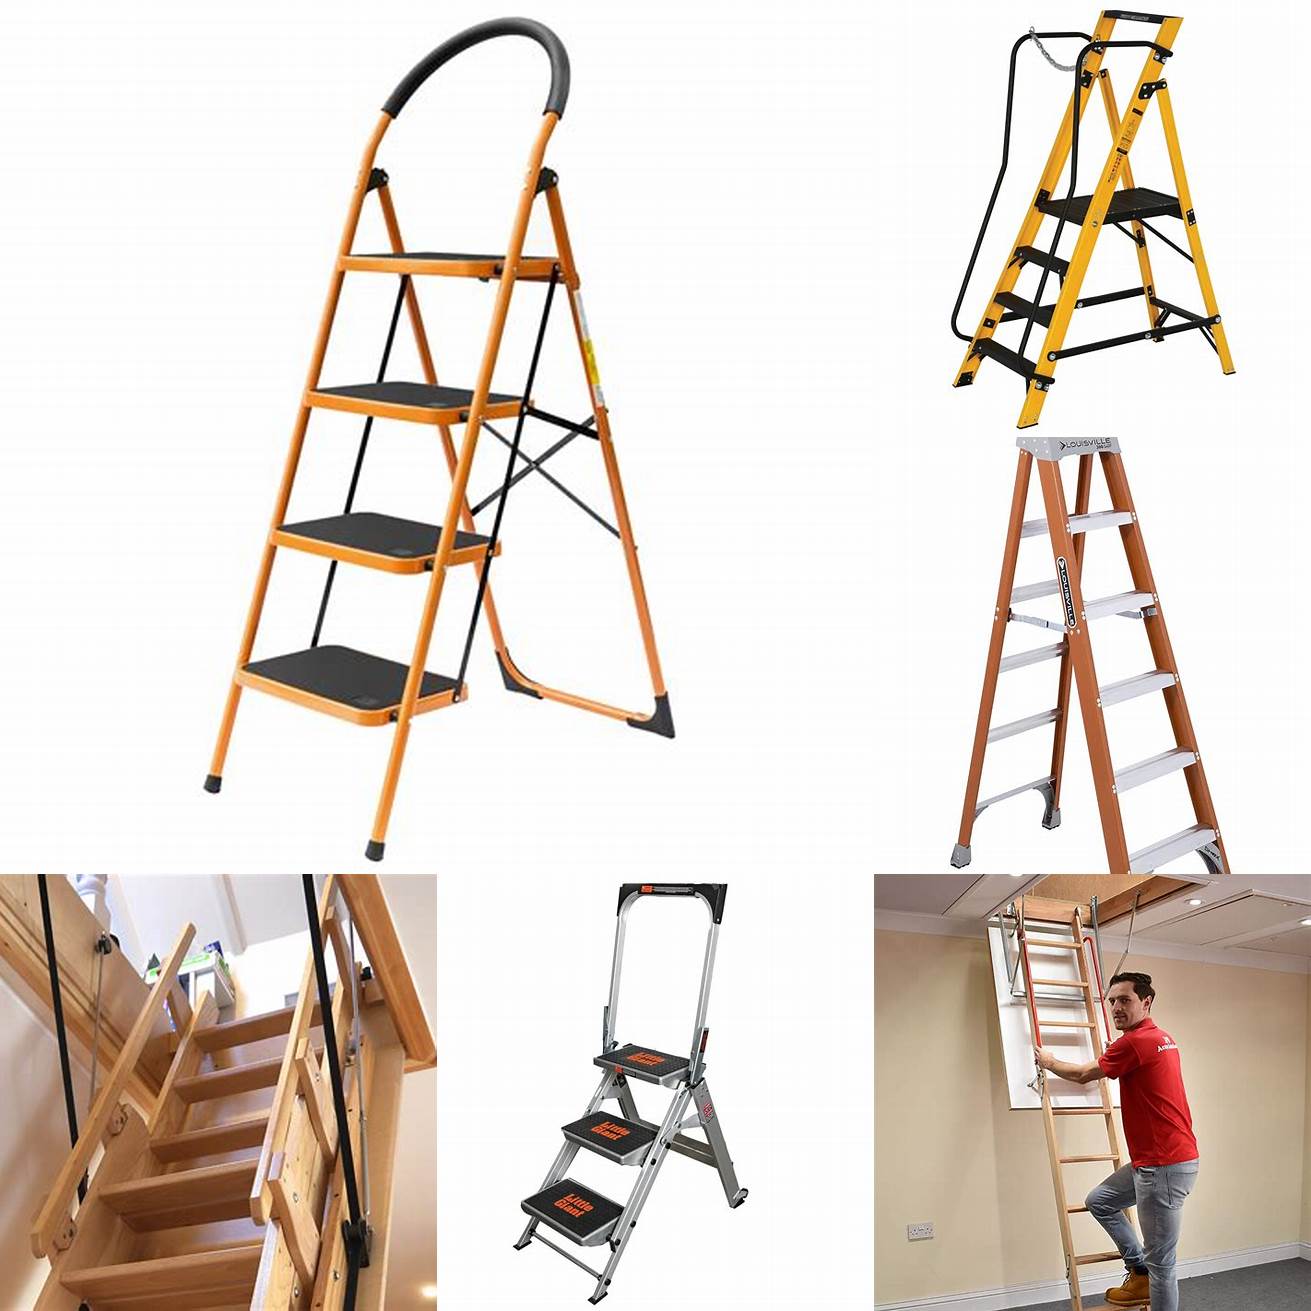 Image of the ladder with wide treads